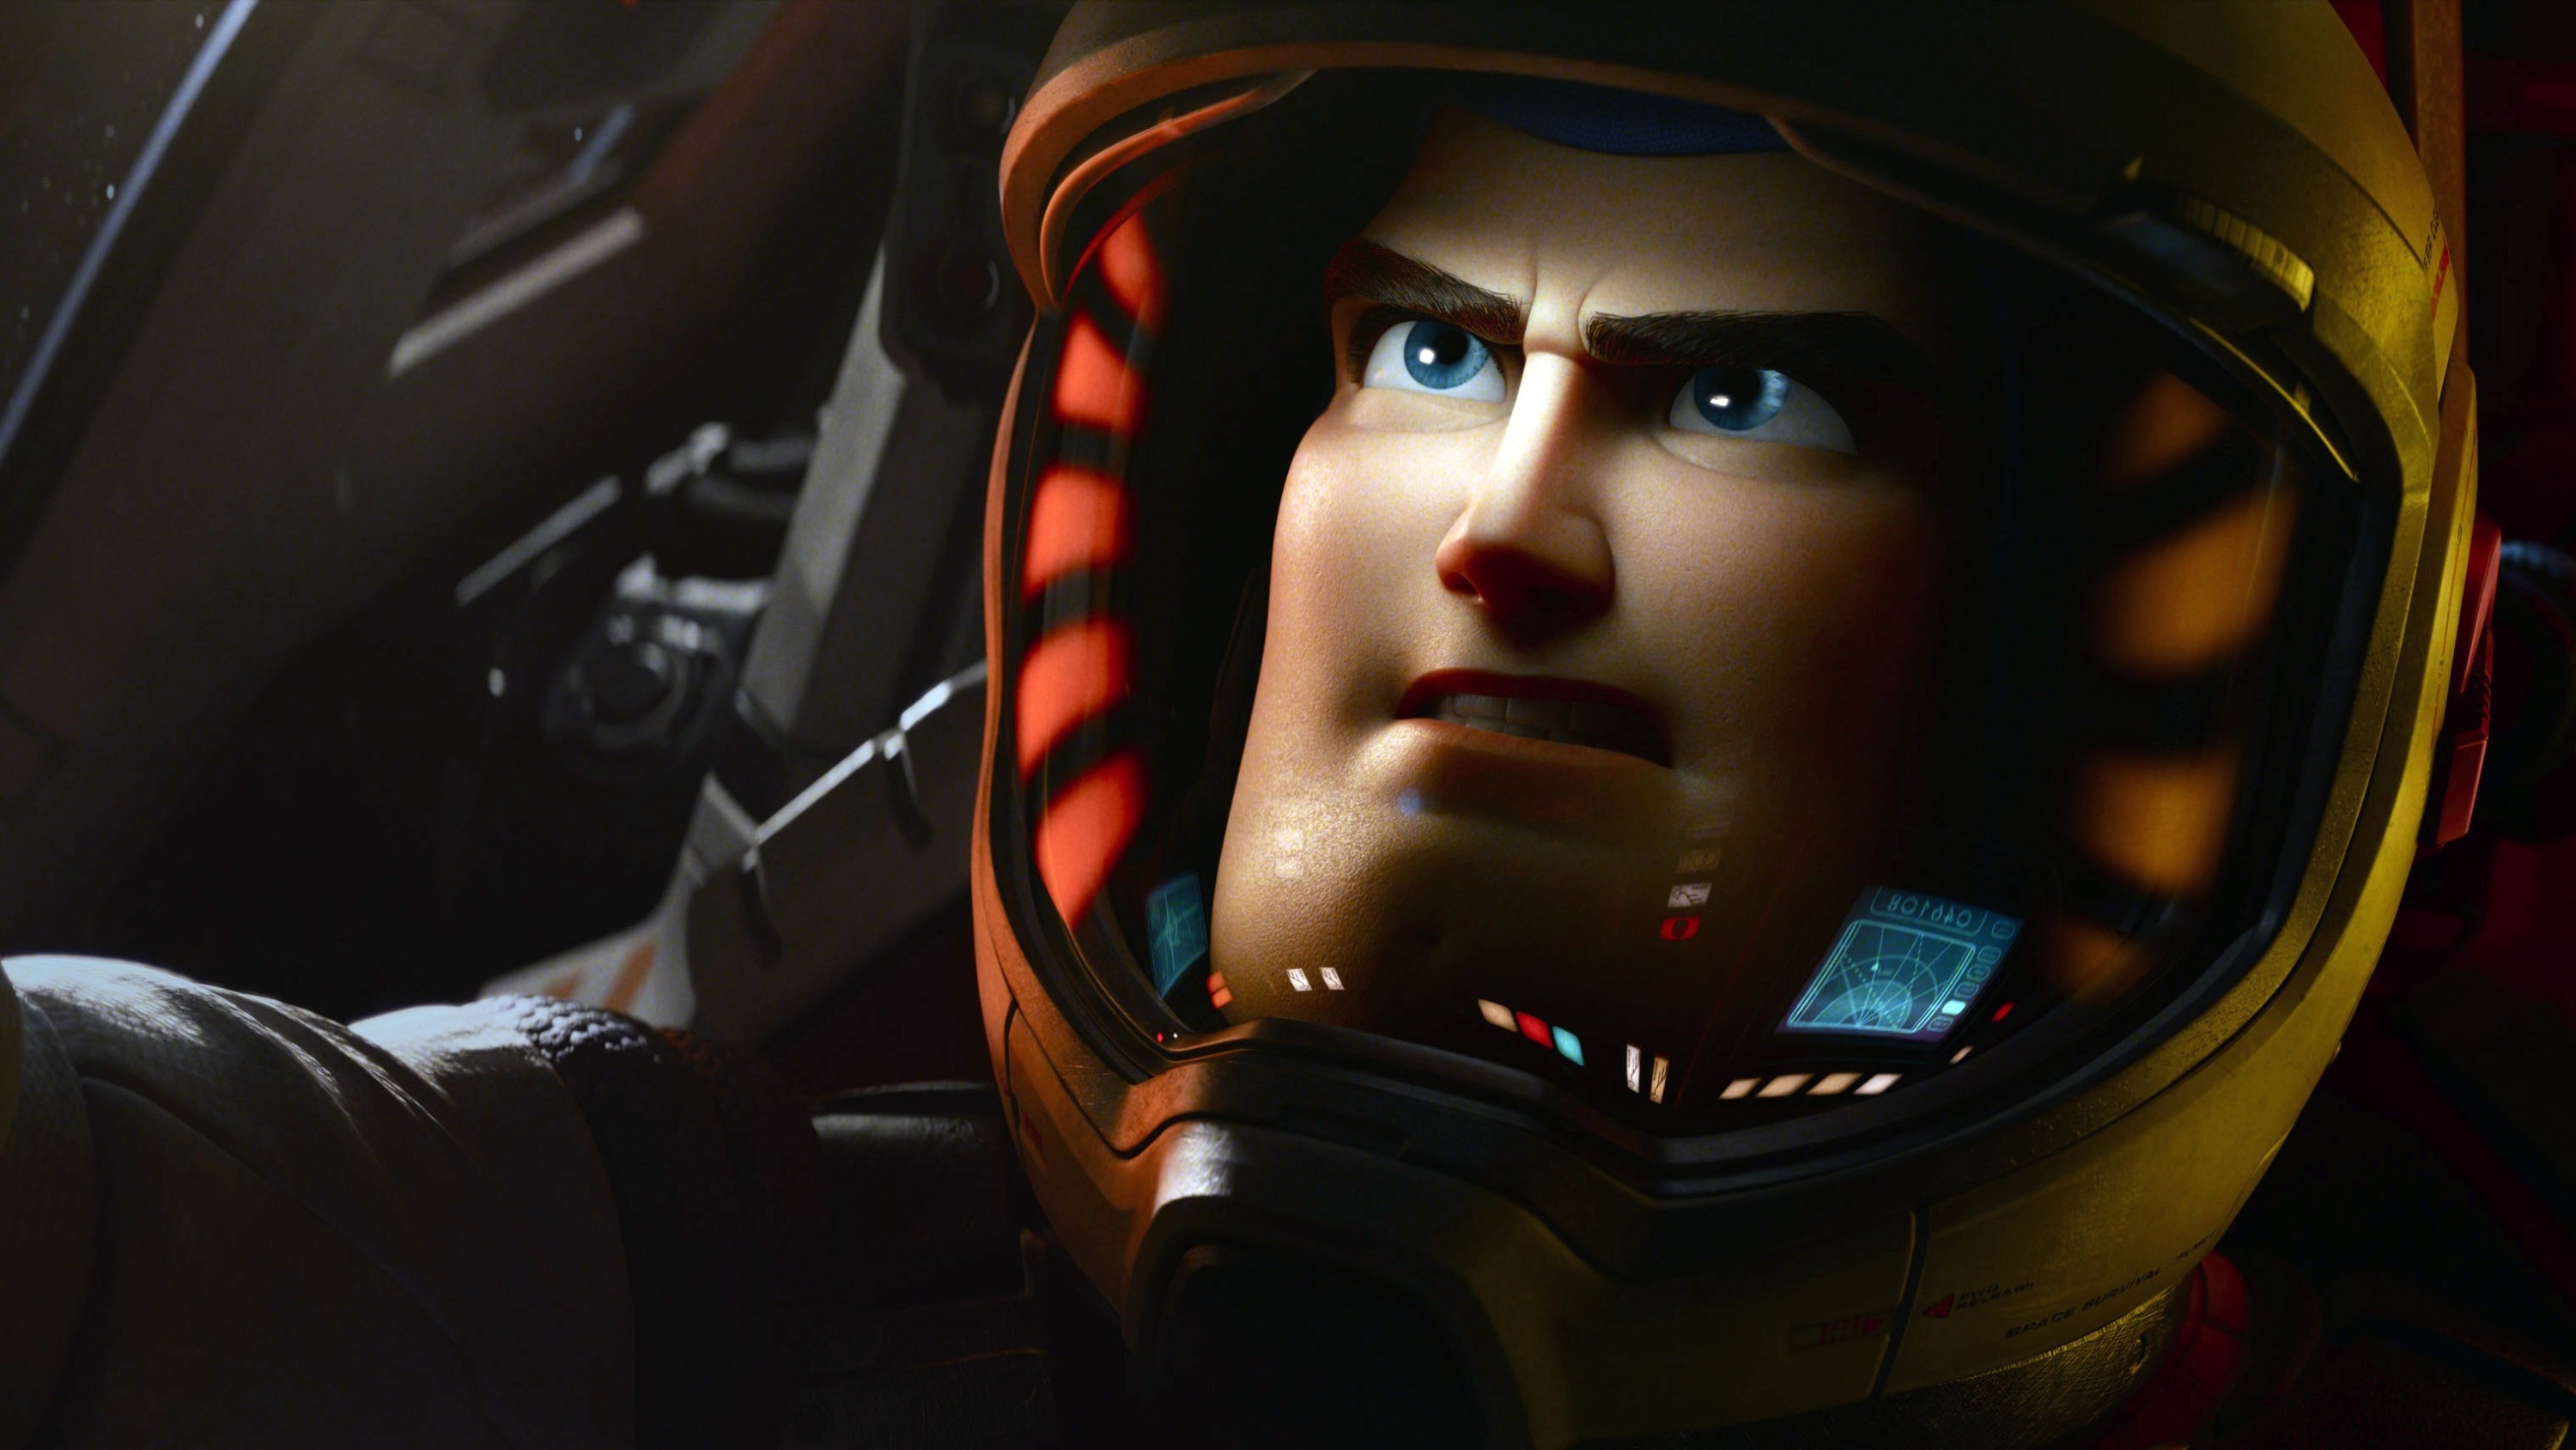 A close up of Buzz Lightyear as he drives a spaceship